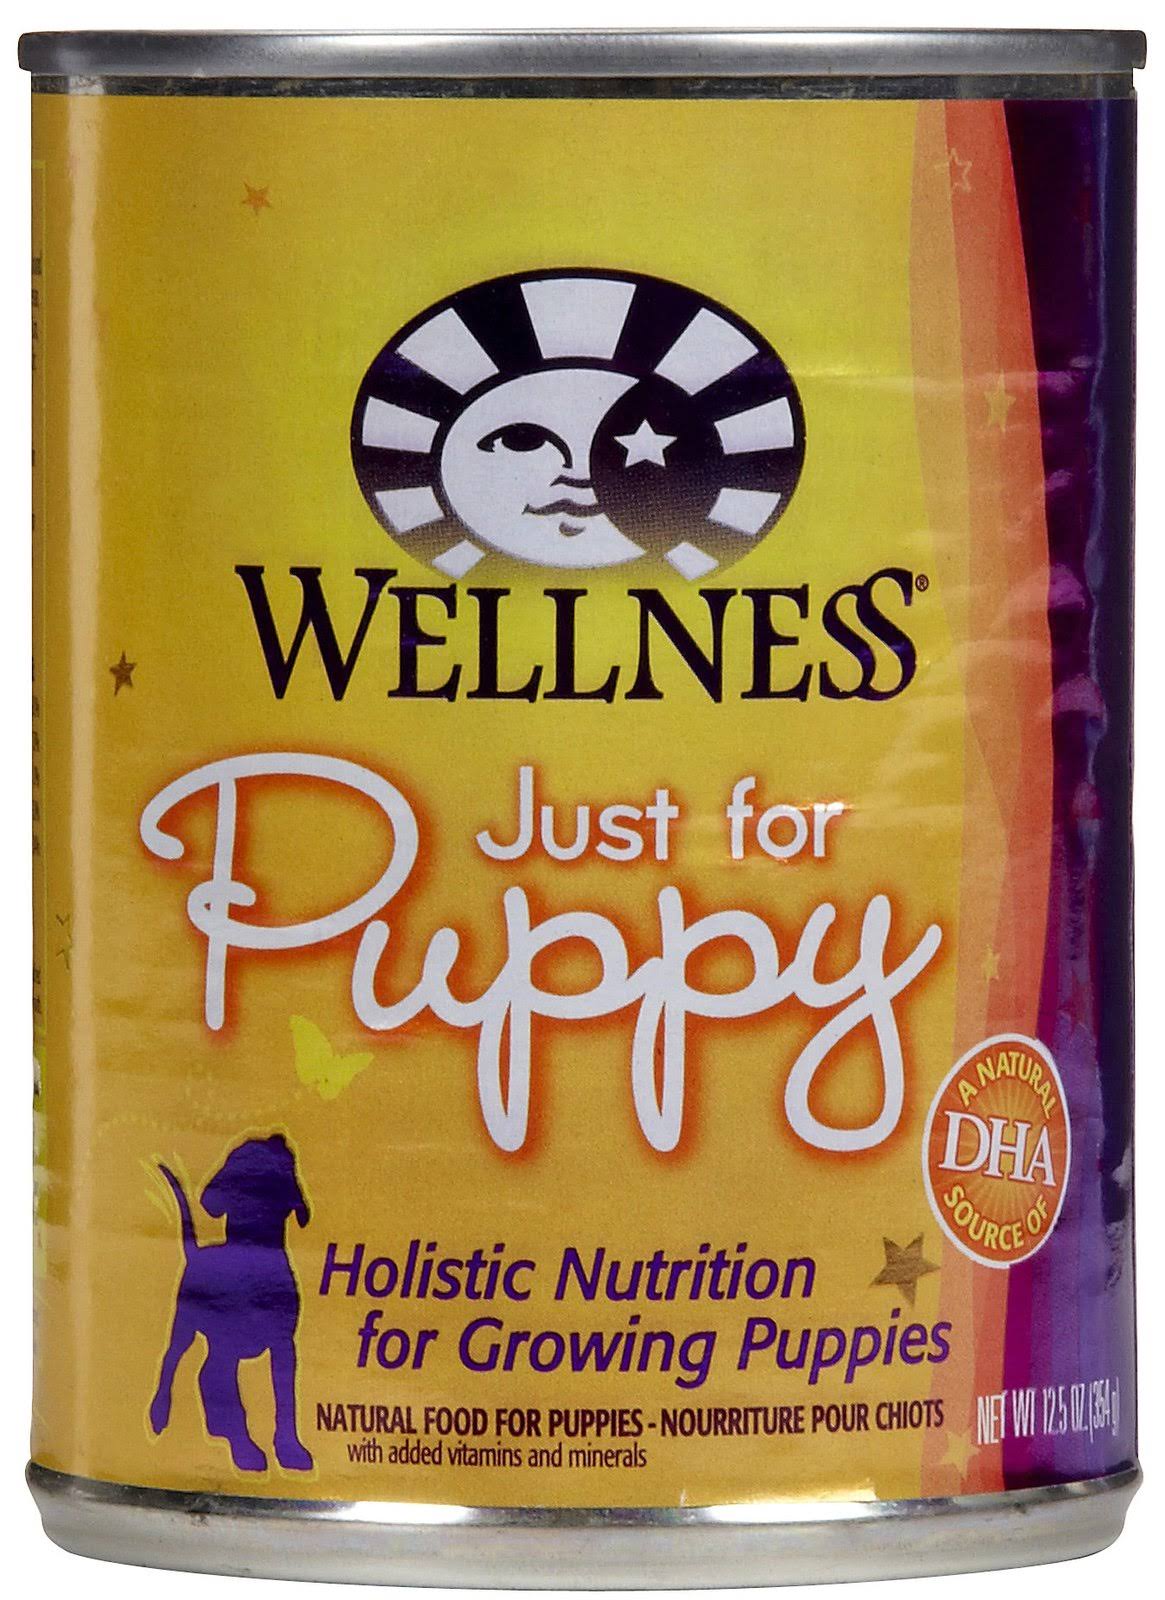 Wellness Complete Health Natural Wet Canned Dog Food - Puppy, 12.5oz